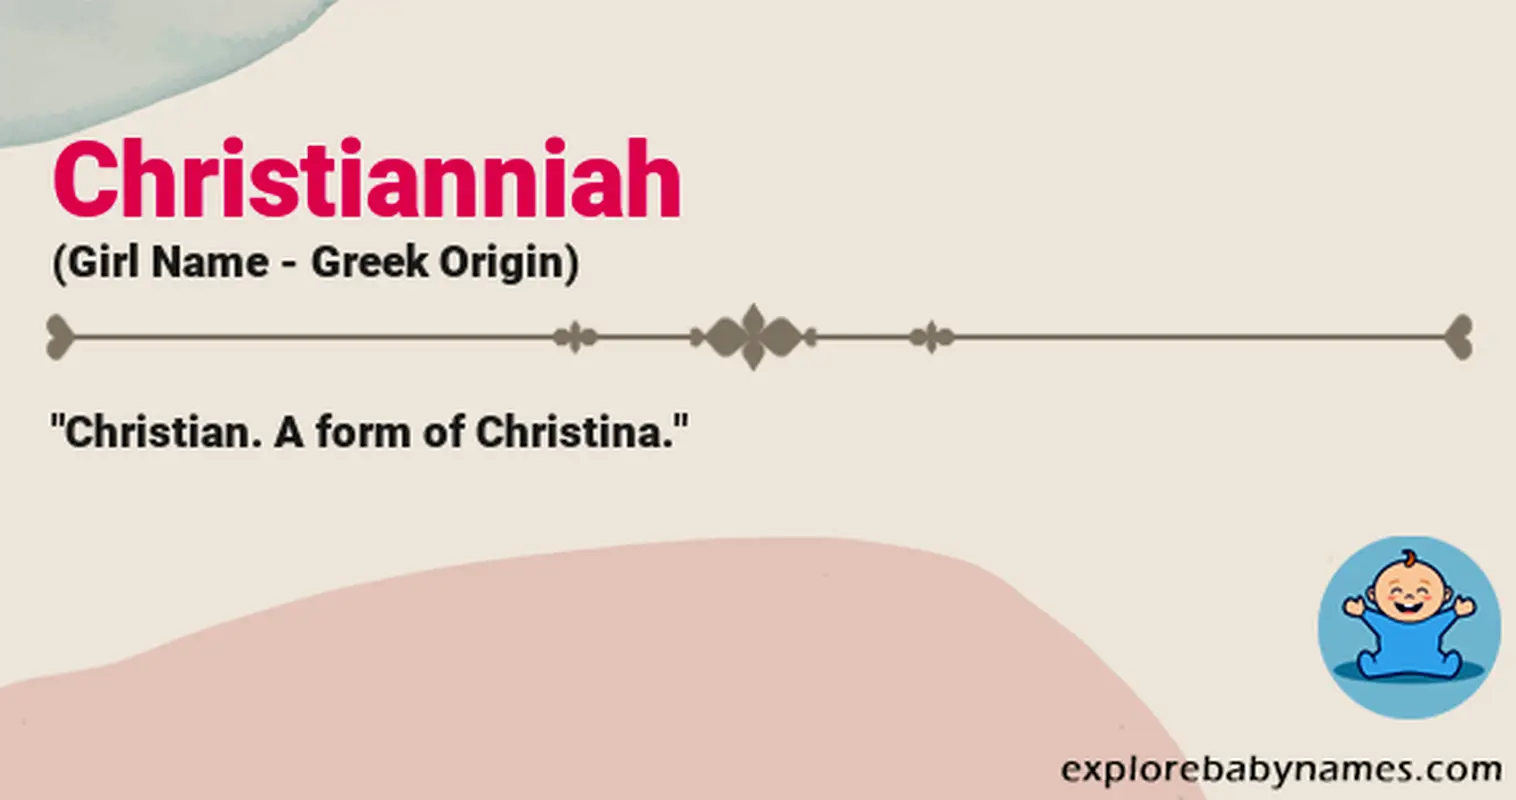 Meaning of Christianniah